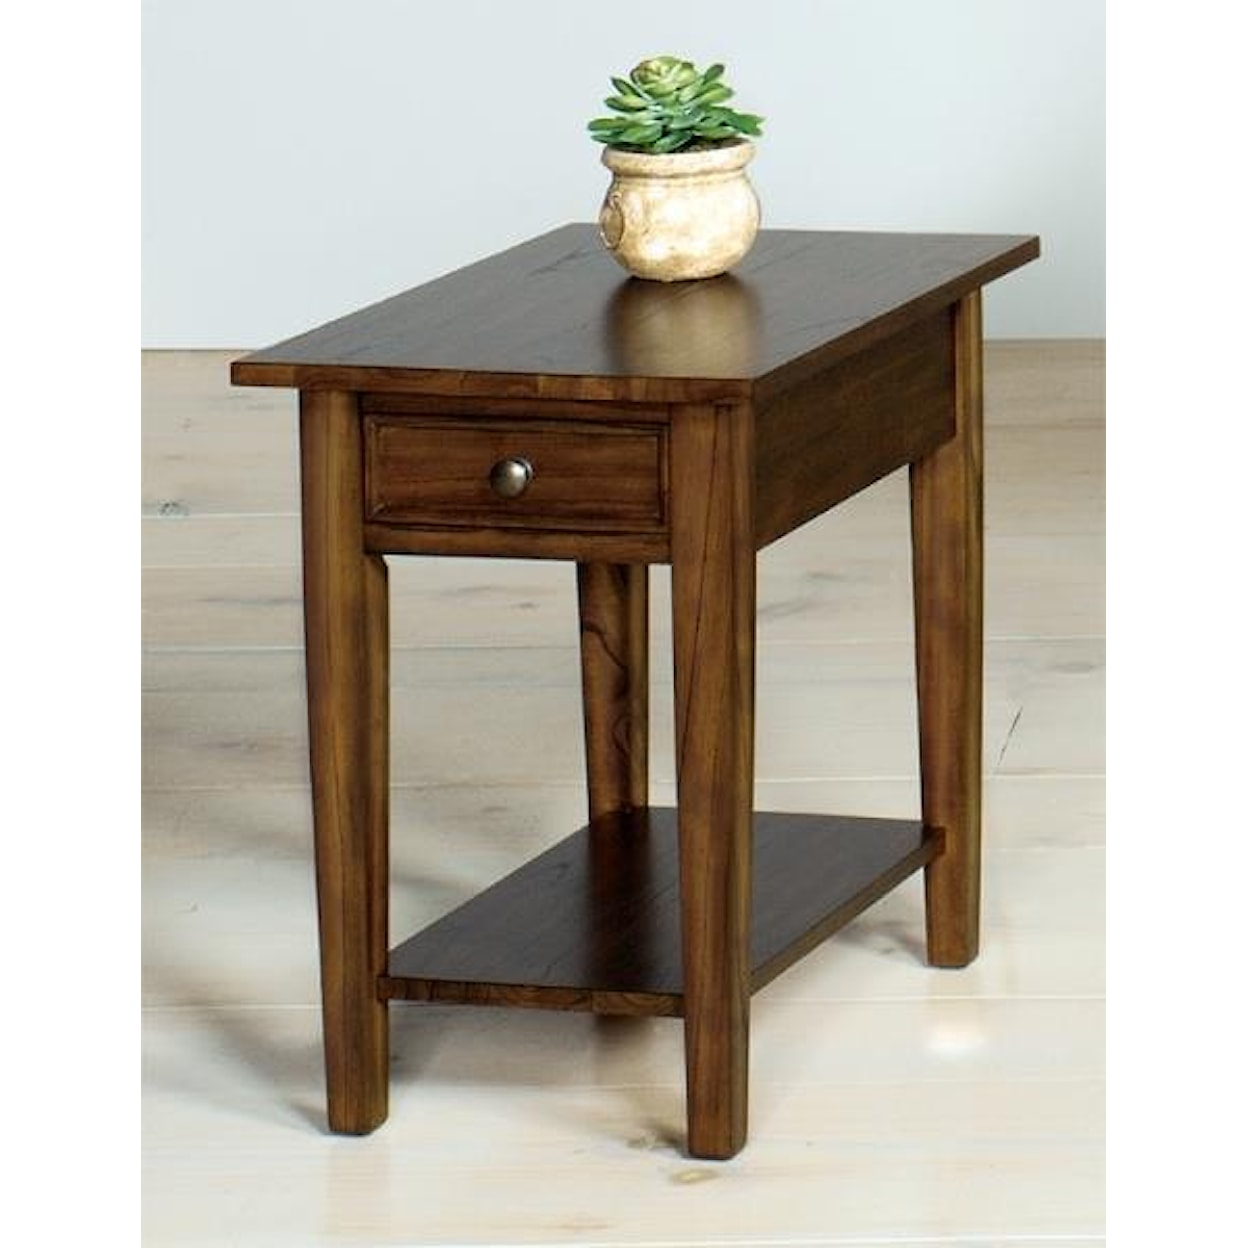 Null Furniture 1900 International Accents Rectangular End Table